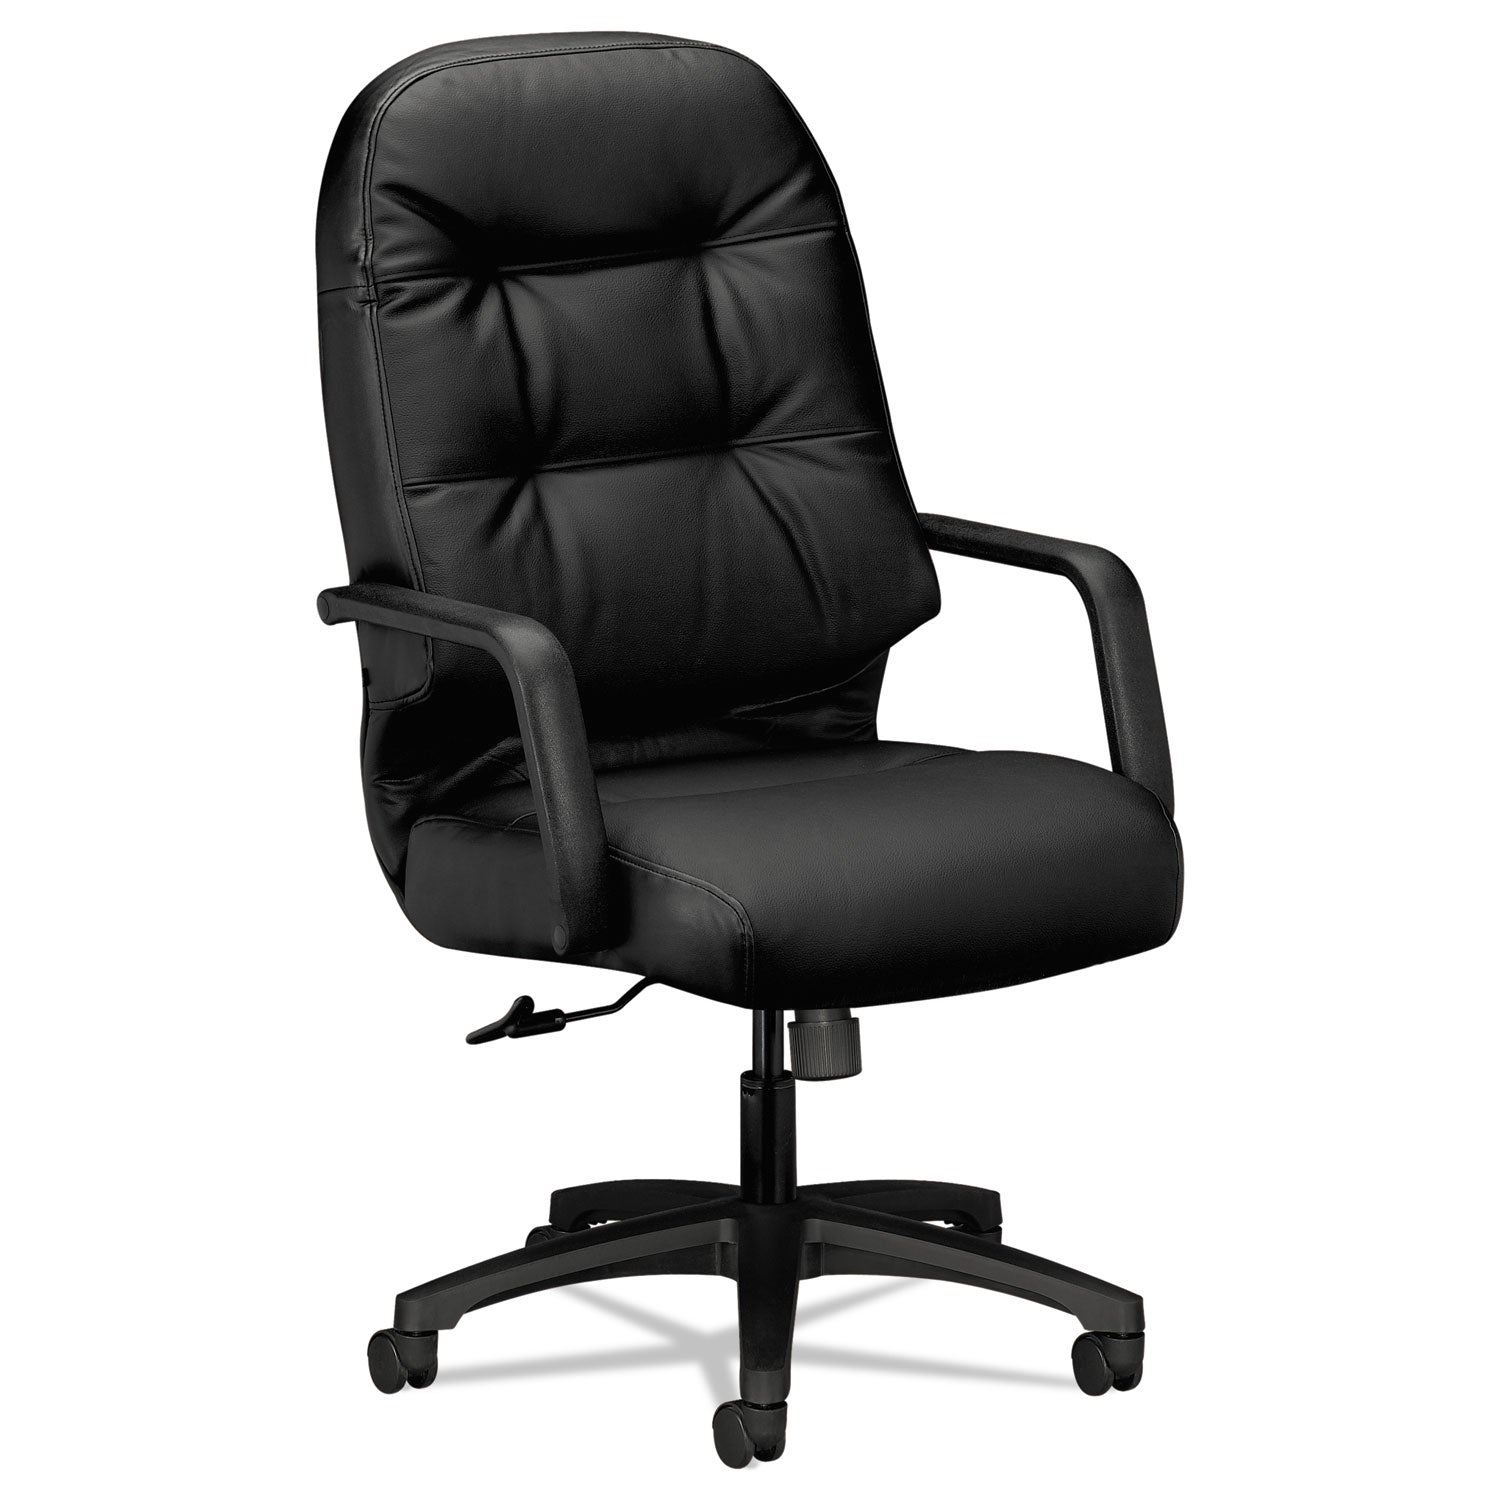 Pillow-Soft 2090 Series Executive High-Back Swivel/Tilt Chair, Supports Up to 300 lb, 16.75" to 21.25" Seat Height, Black - 